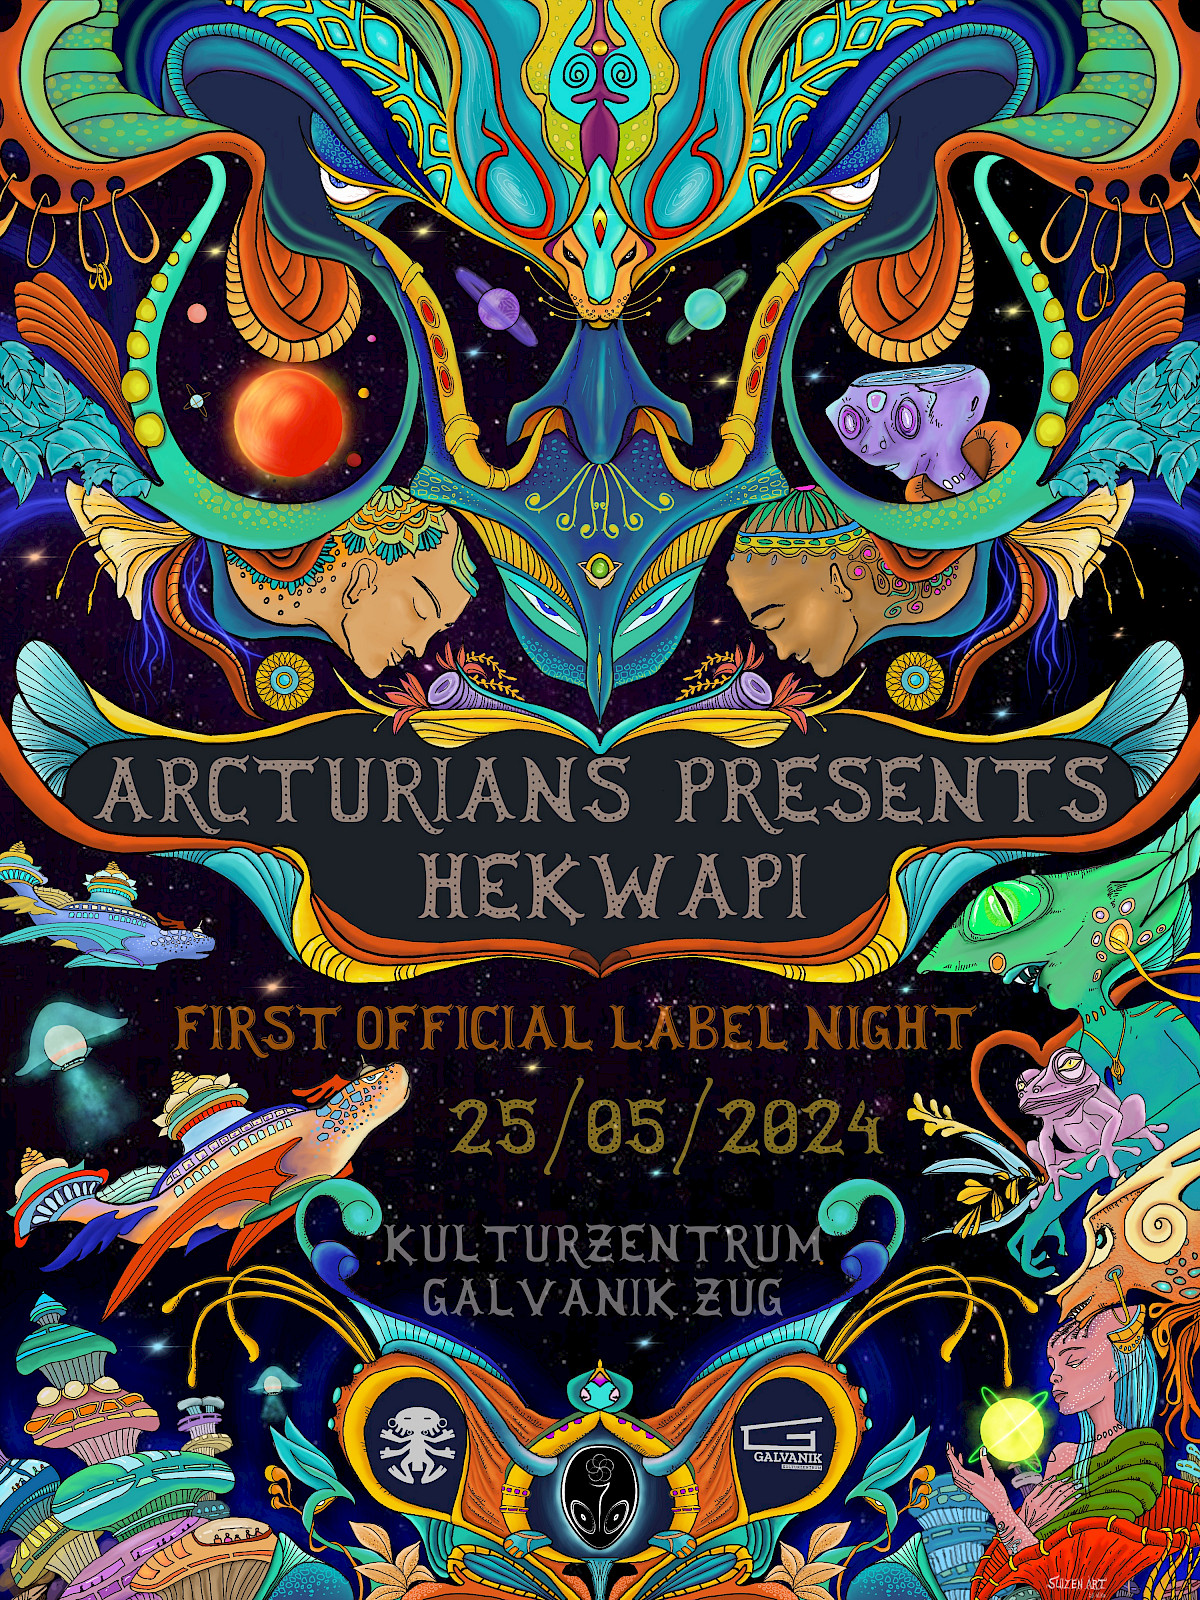 Arcturians presents Hekwapi - First official label night